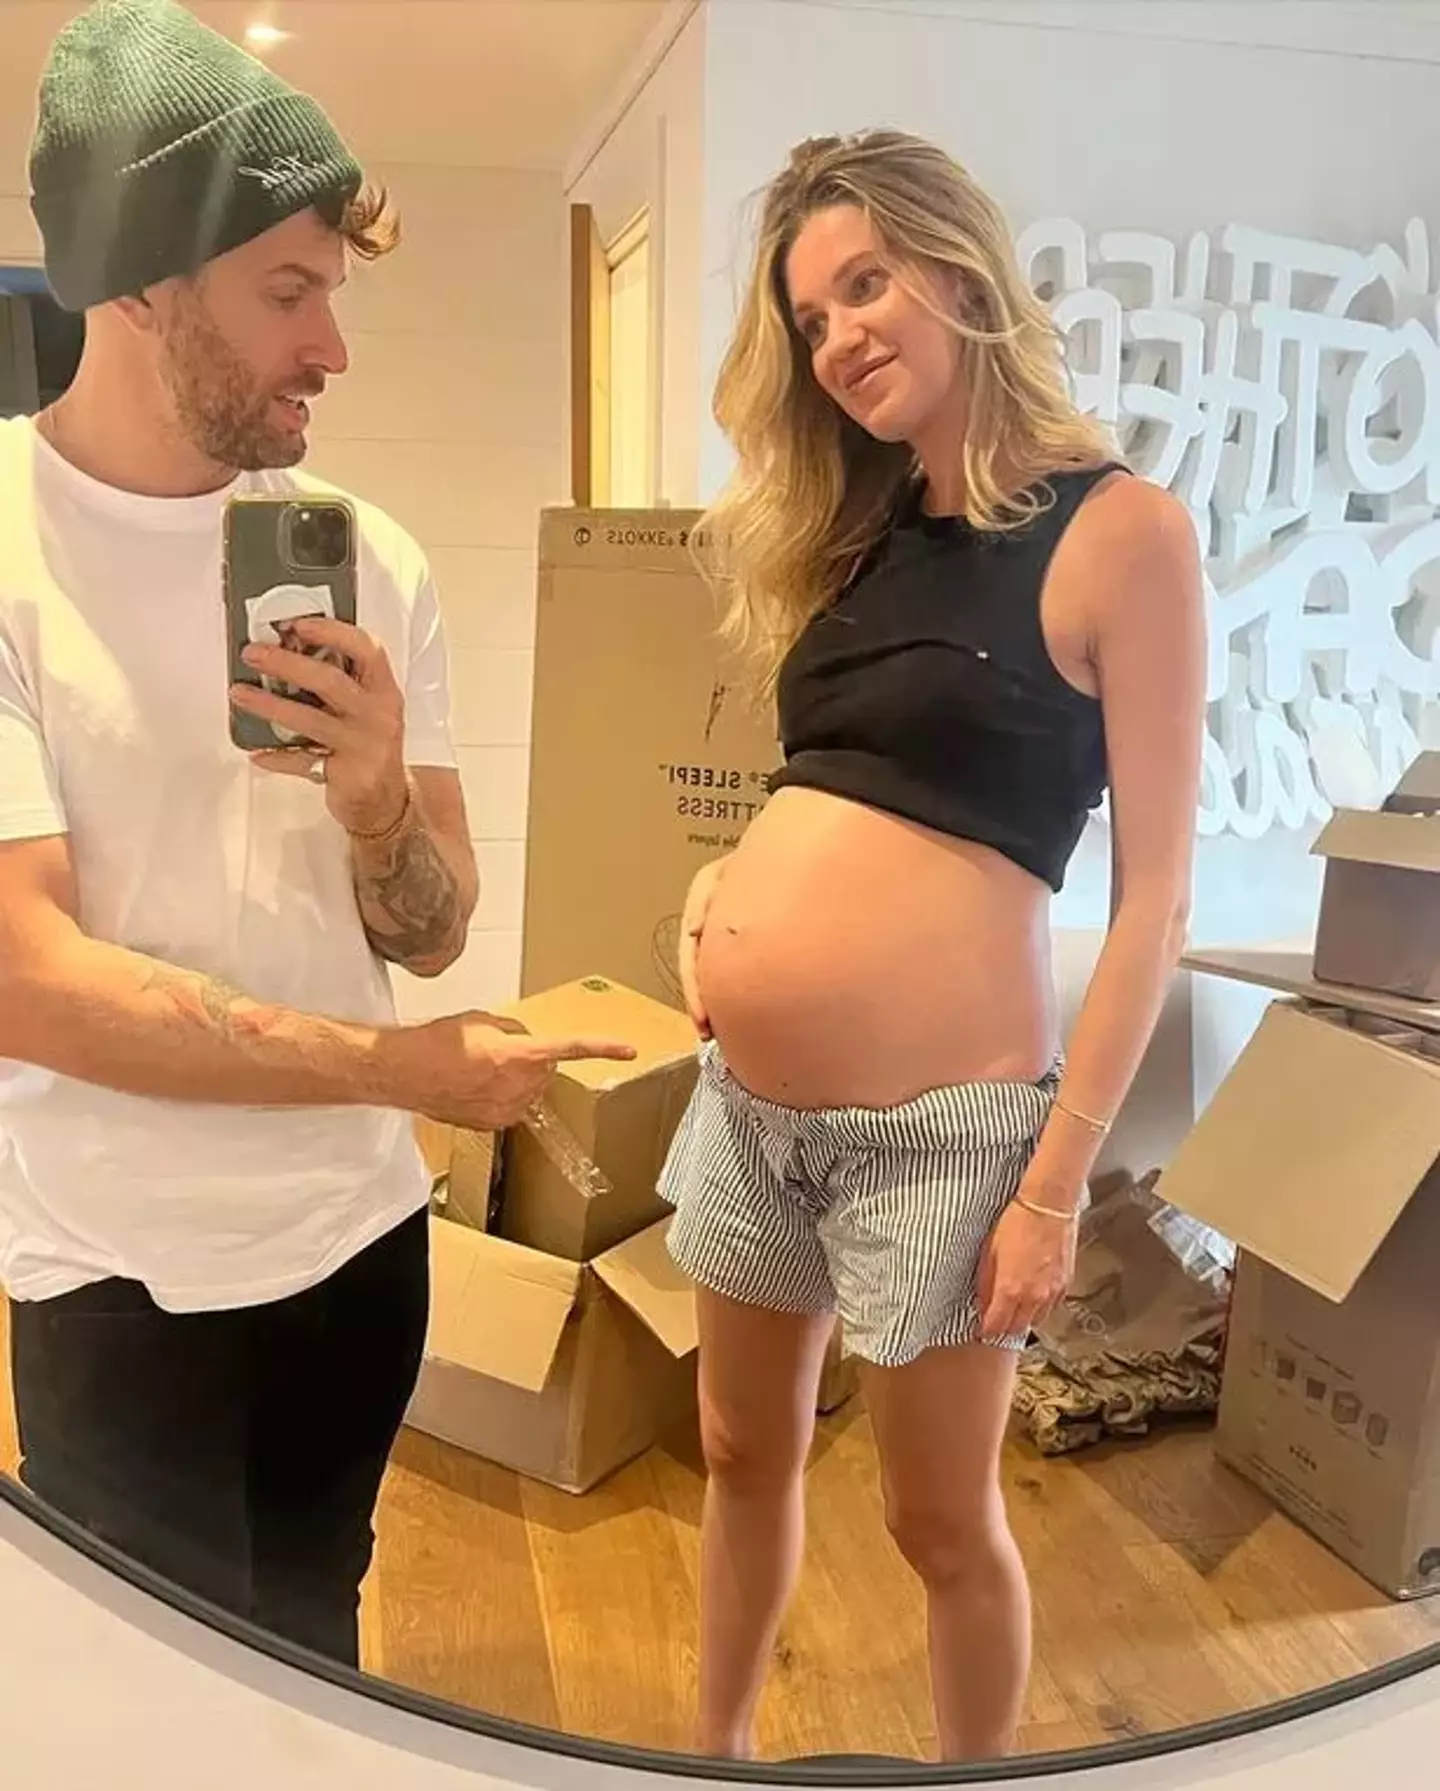 The celebrity couple have shared plenty of pregnancy updates with fans.